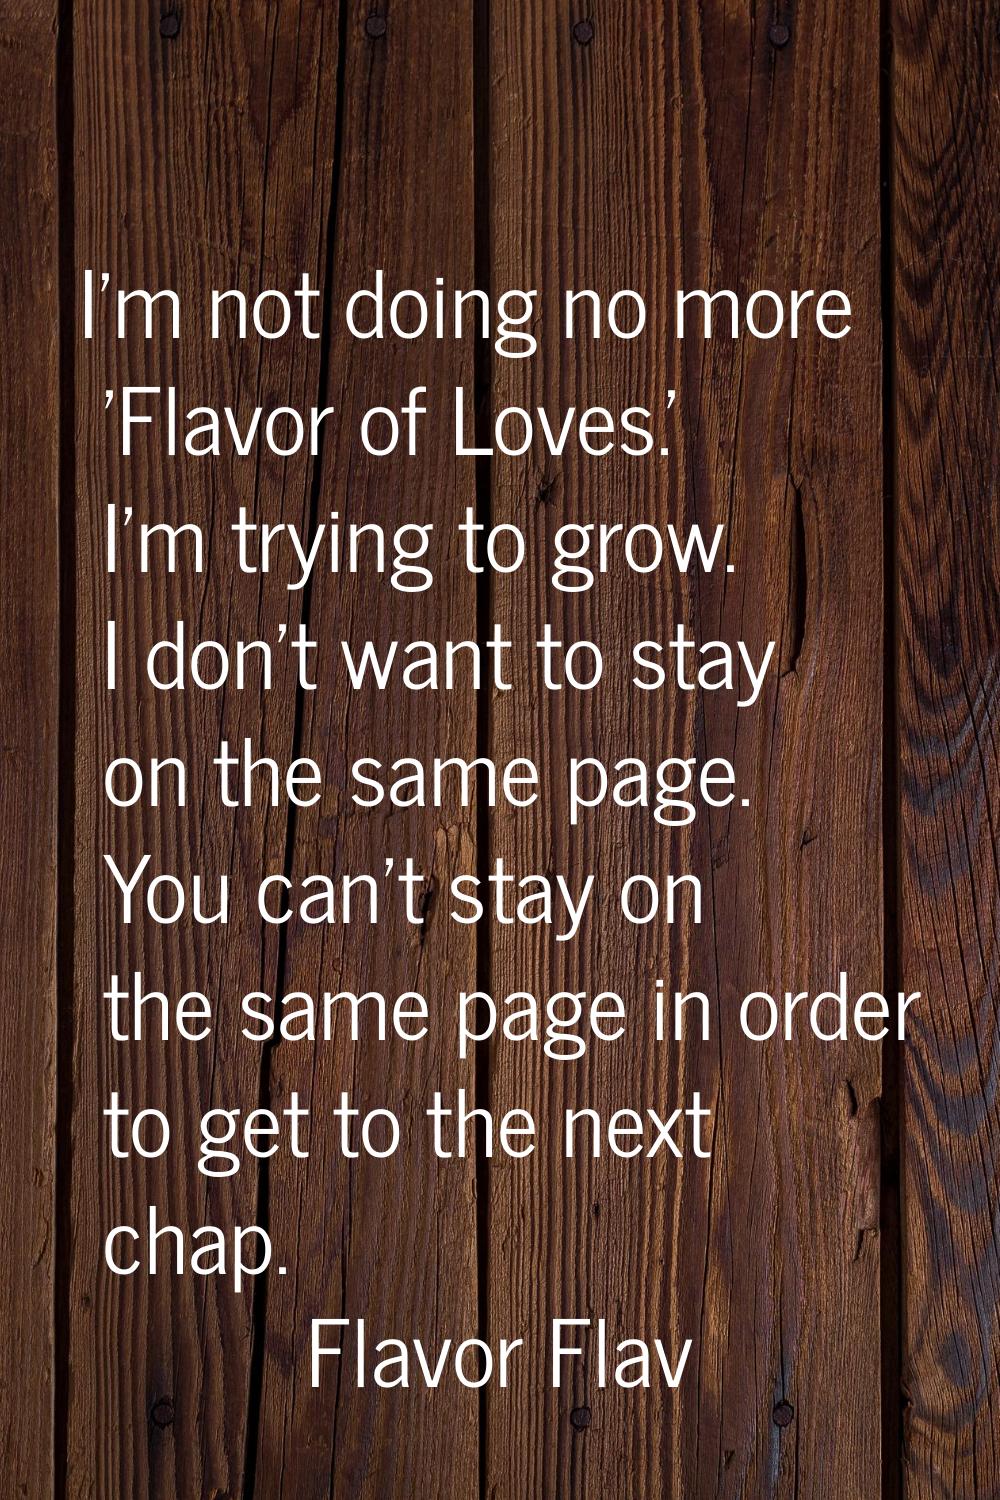 I'm not doing no more 'Flavor of Loves.' I'm trying to grow. I don't want to stay on the same page.